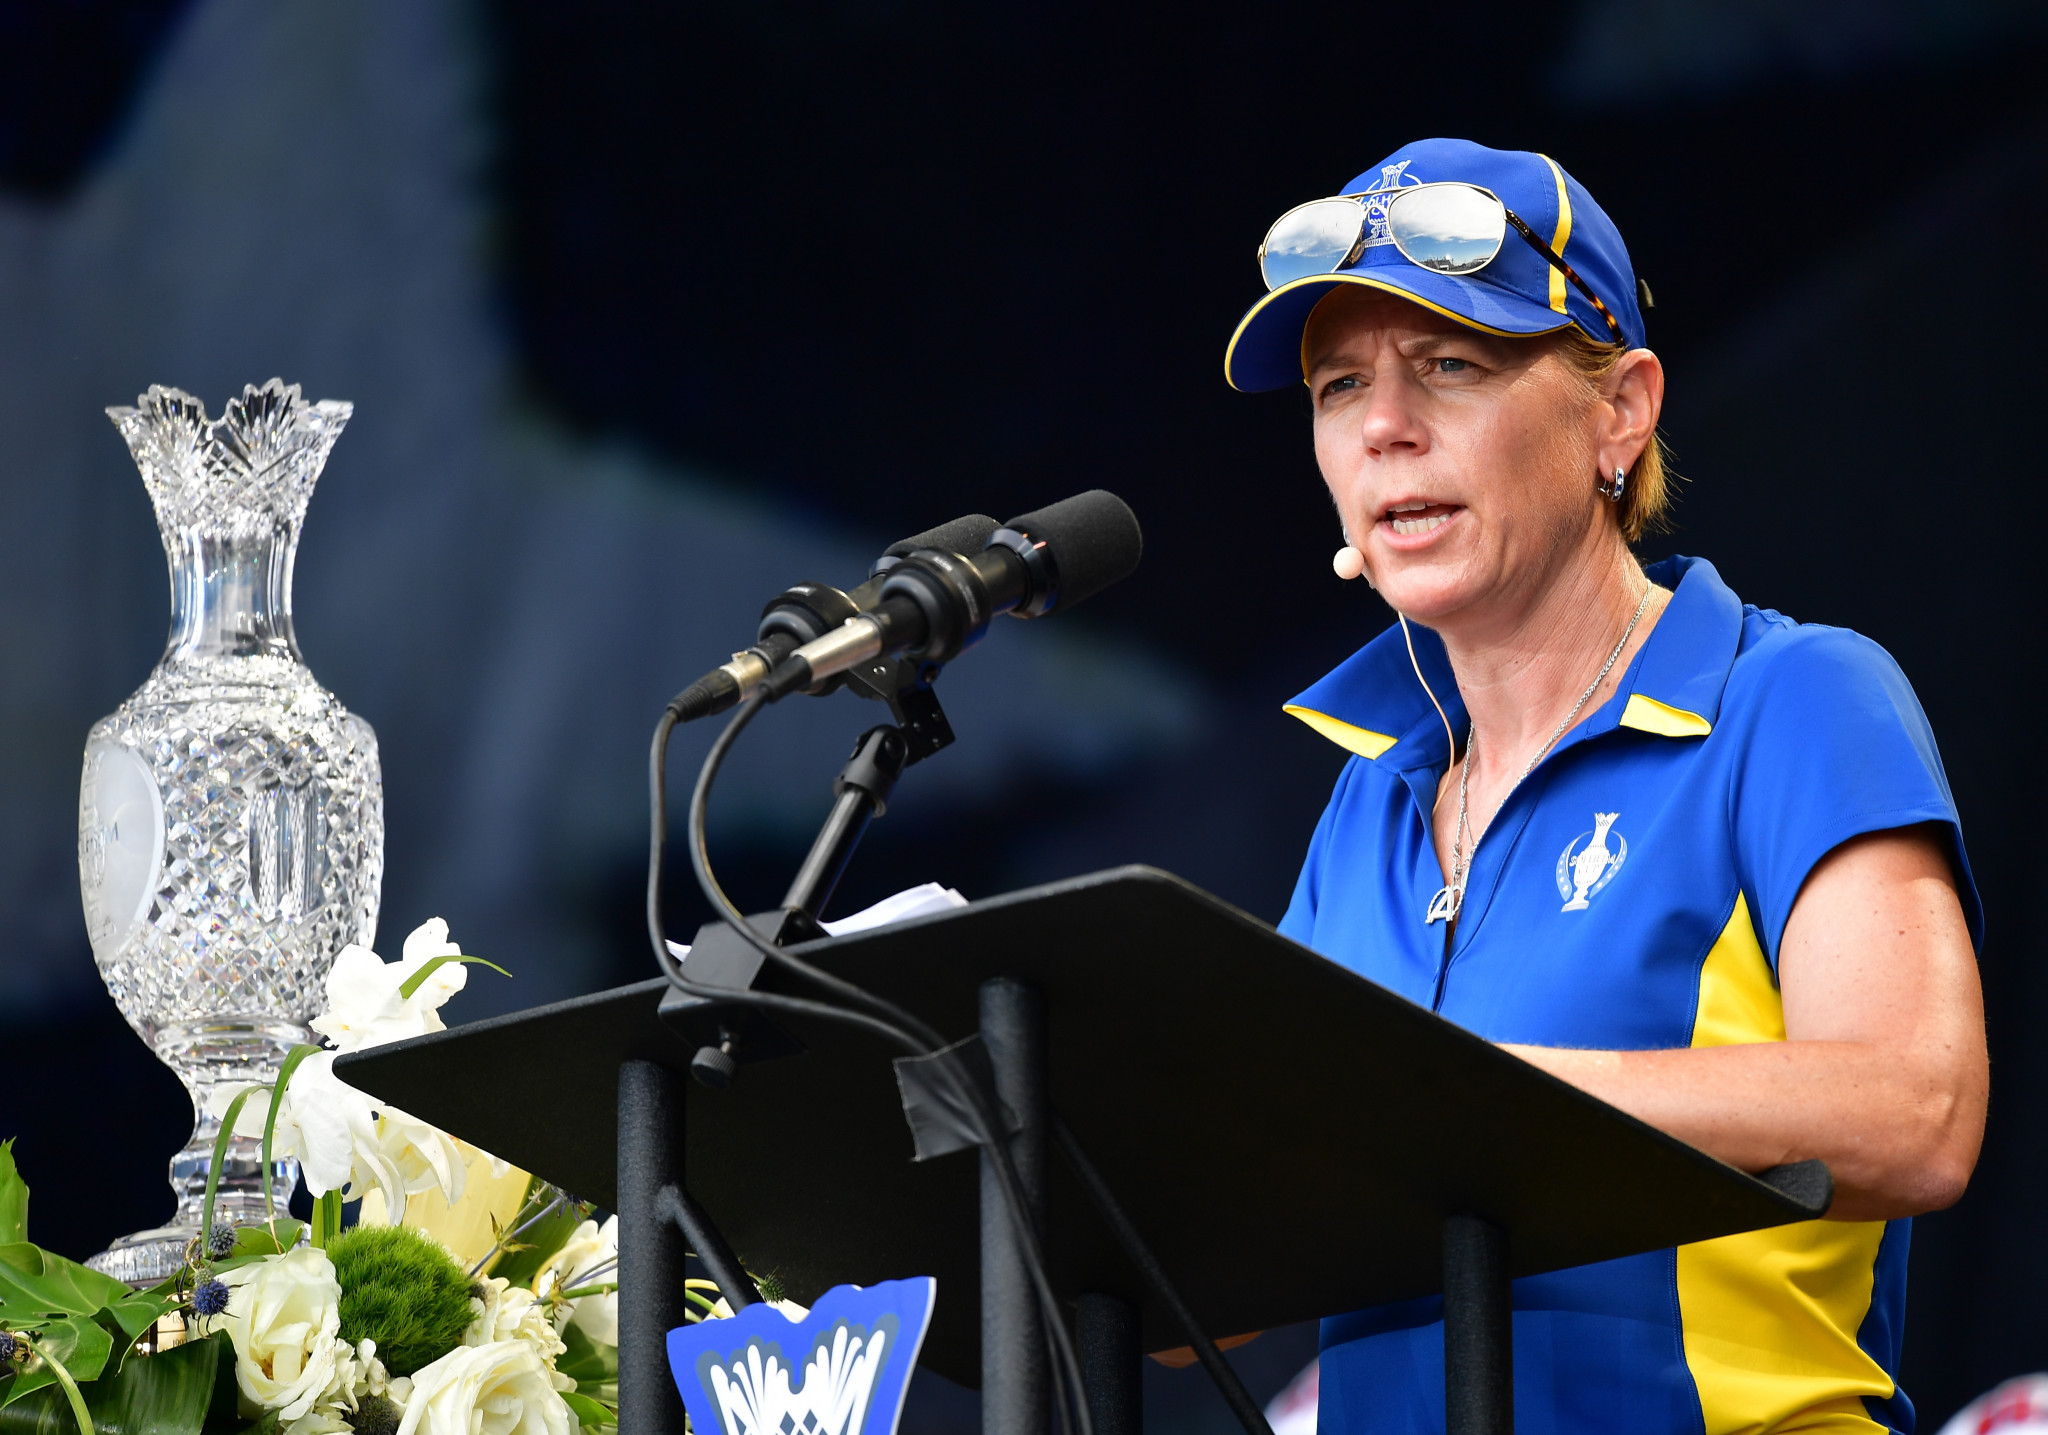 Fellow Swede Annika Sörenstam became the first woman to secure the role of President of the International Golf Federation last year ©Getty Images